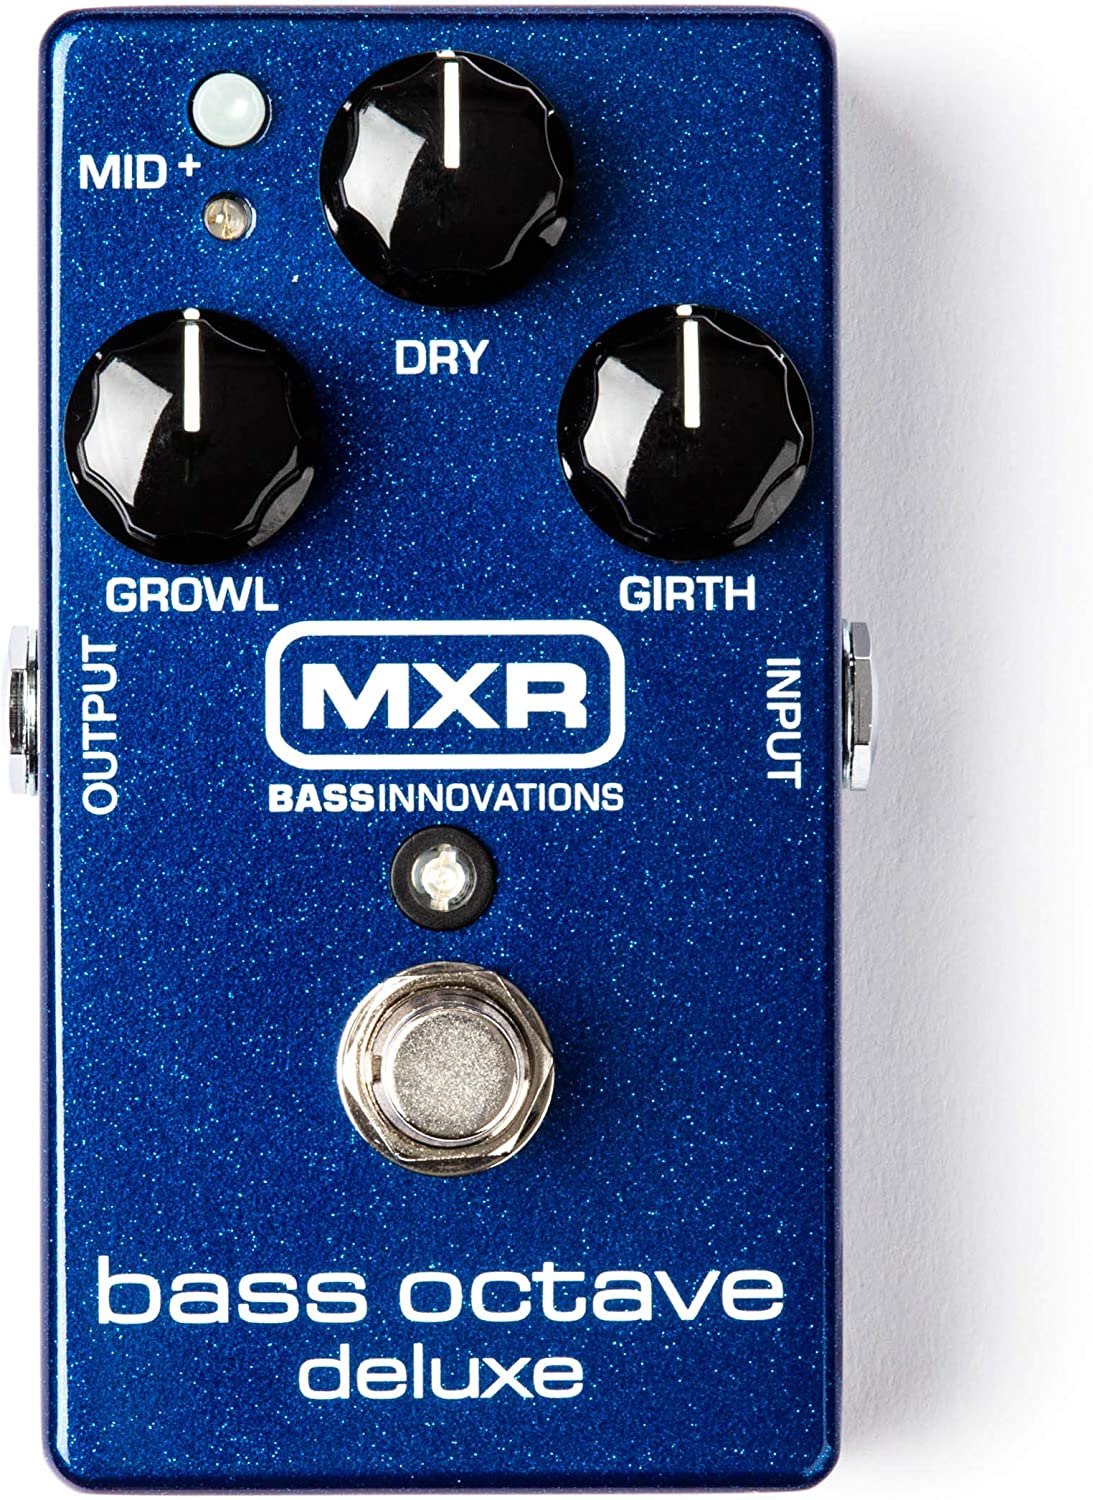 MXR M288 Bass Octave Deluxe Pedal on a white background